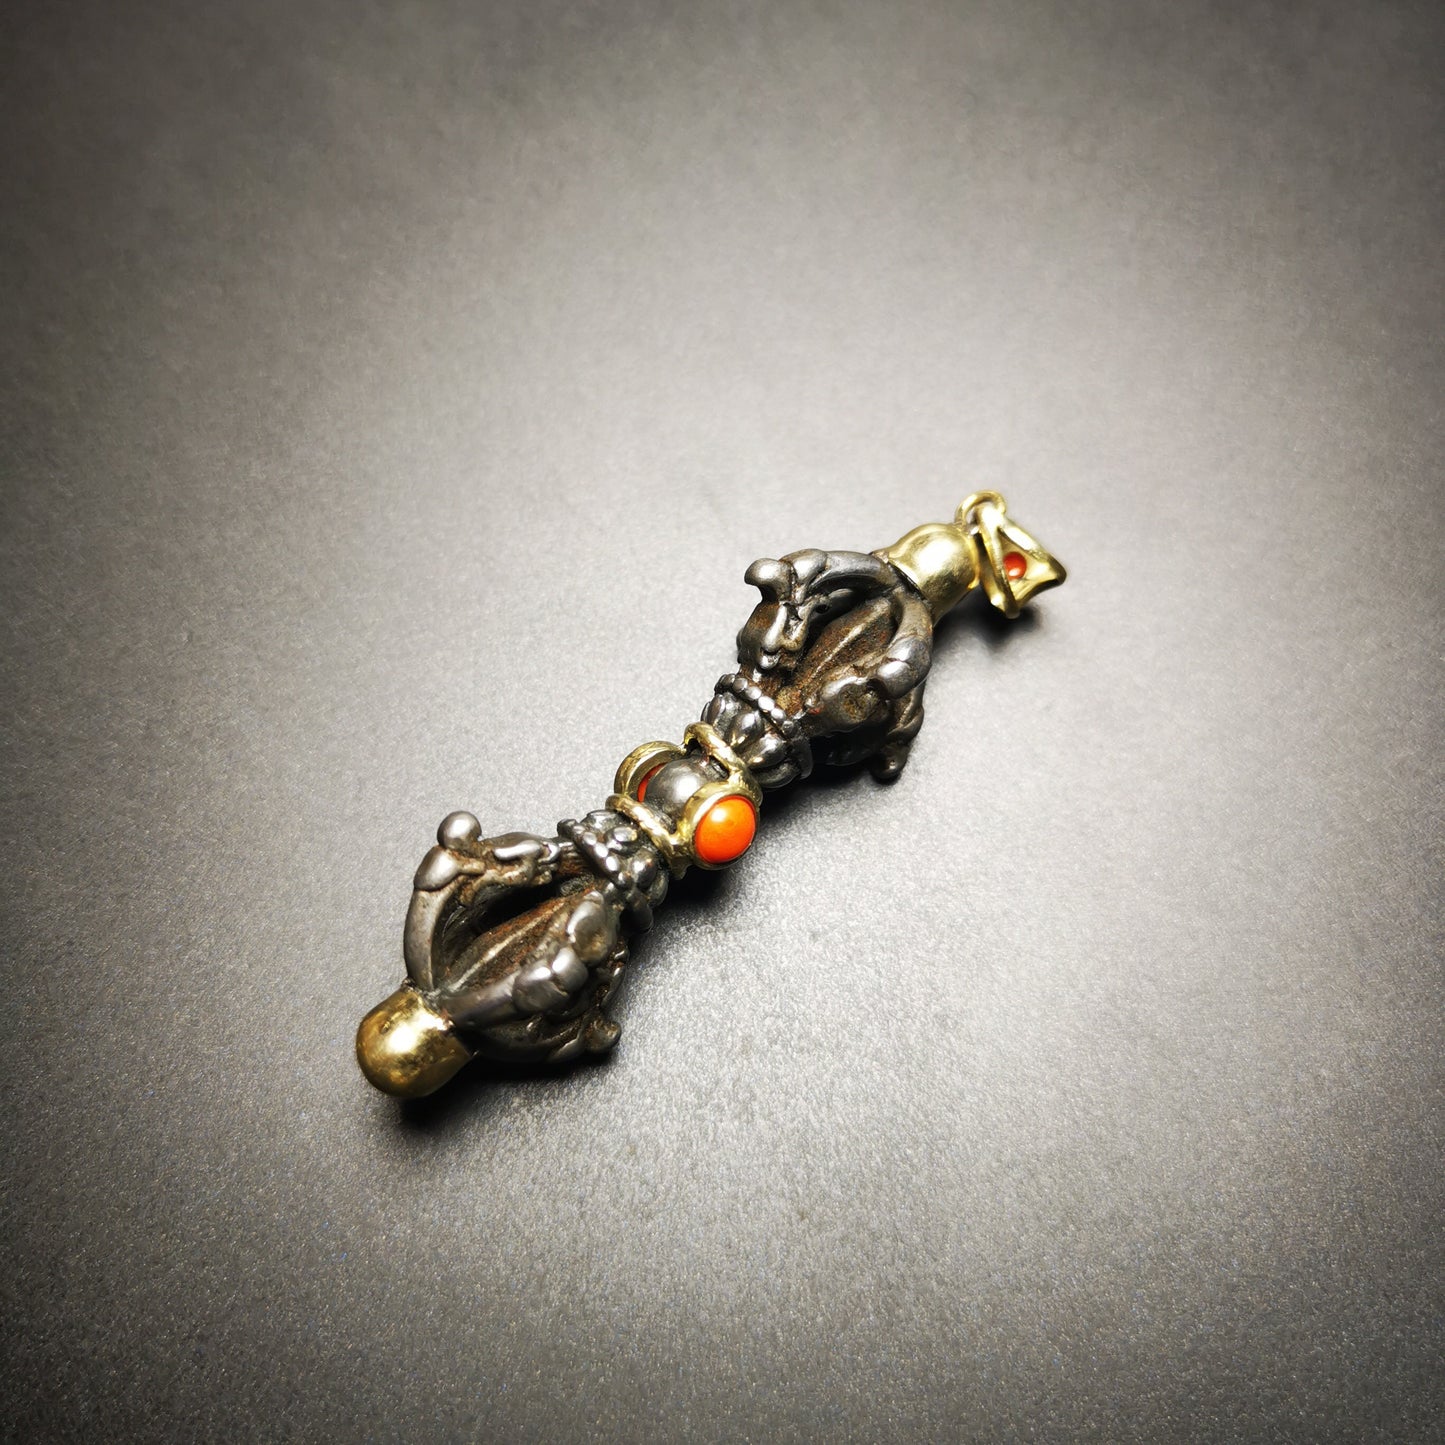 Gandhanra Tibetan Buddhist Amulet,Dorje Vajra Pendant, Made of Cold Iron,Inlaid with Agate